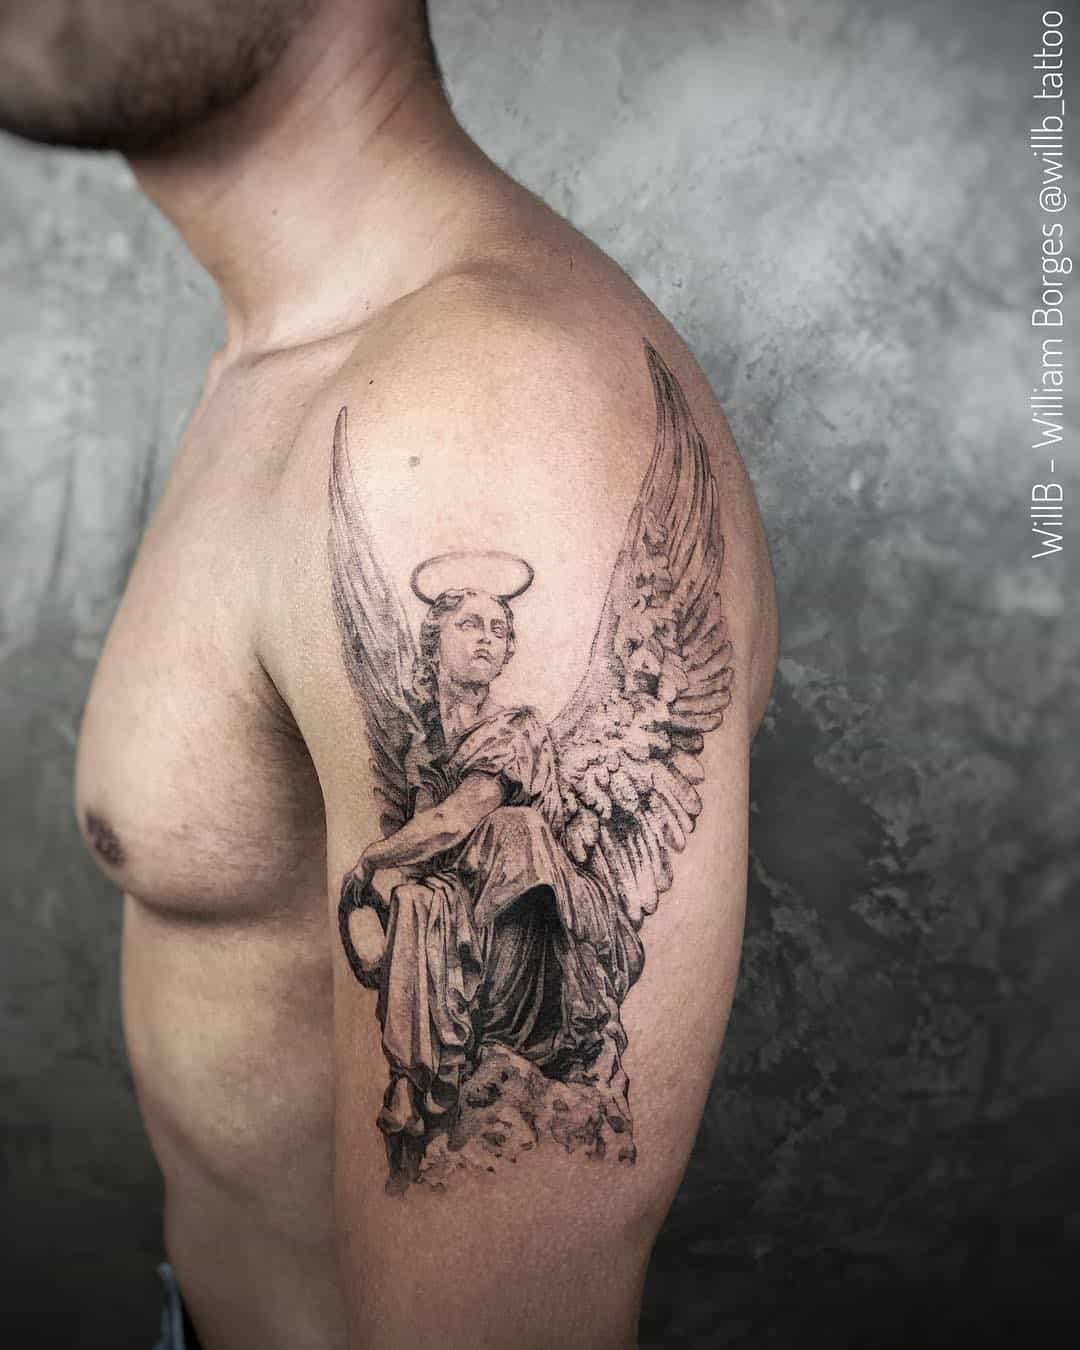 30+ Unique Angel Tattoo Design Ideas (And The Meaning Behind Them) - Saved Tattoo